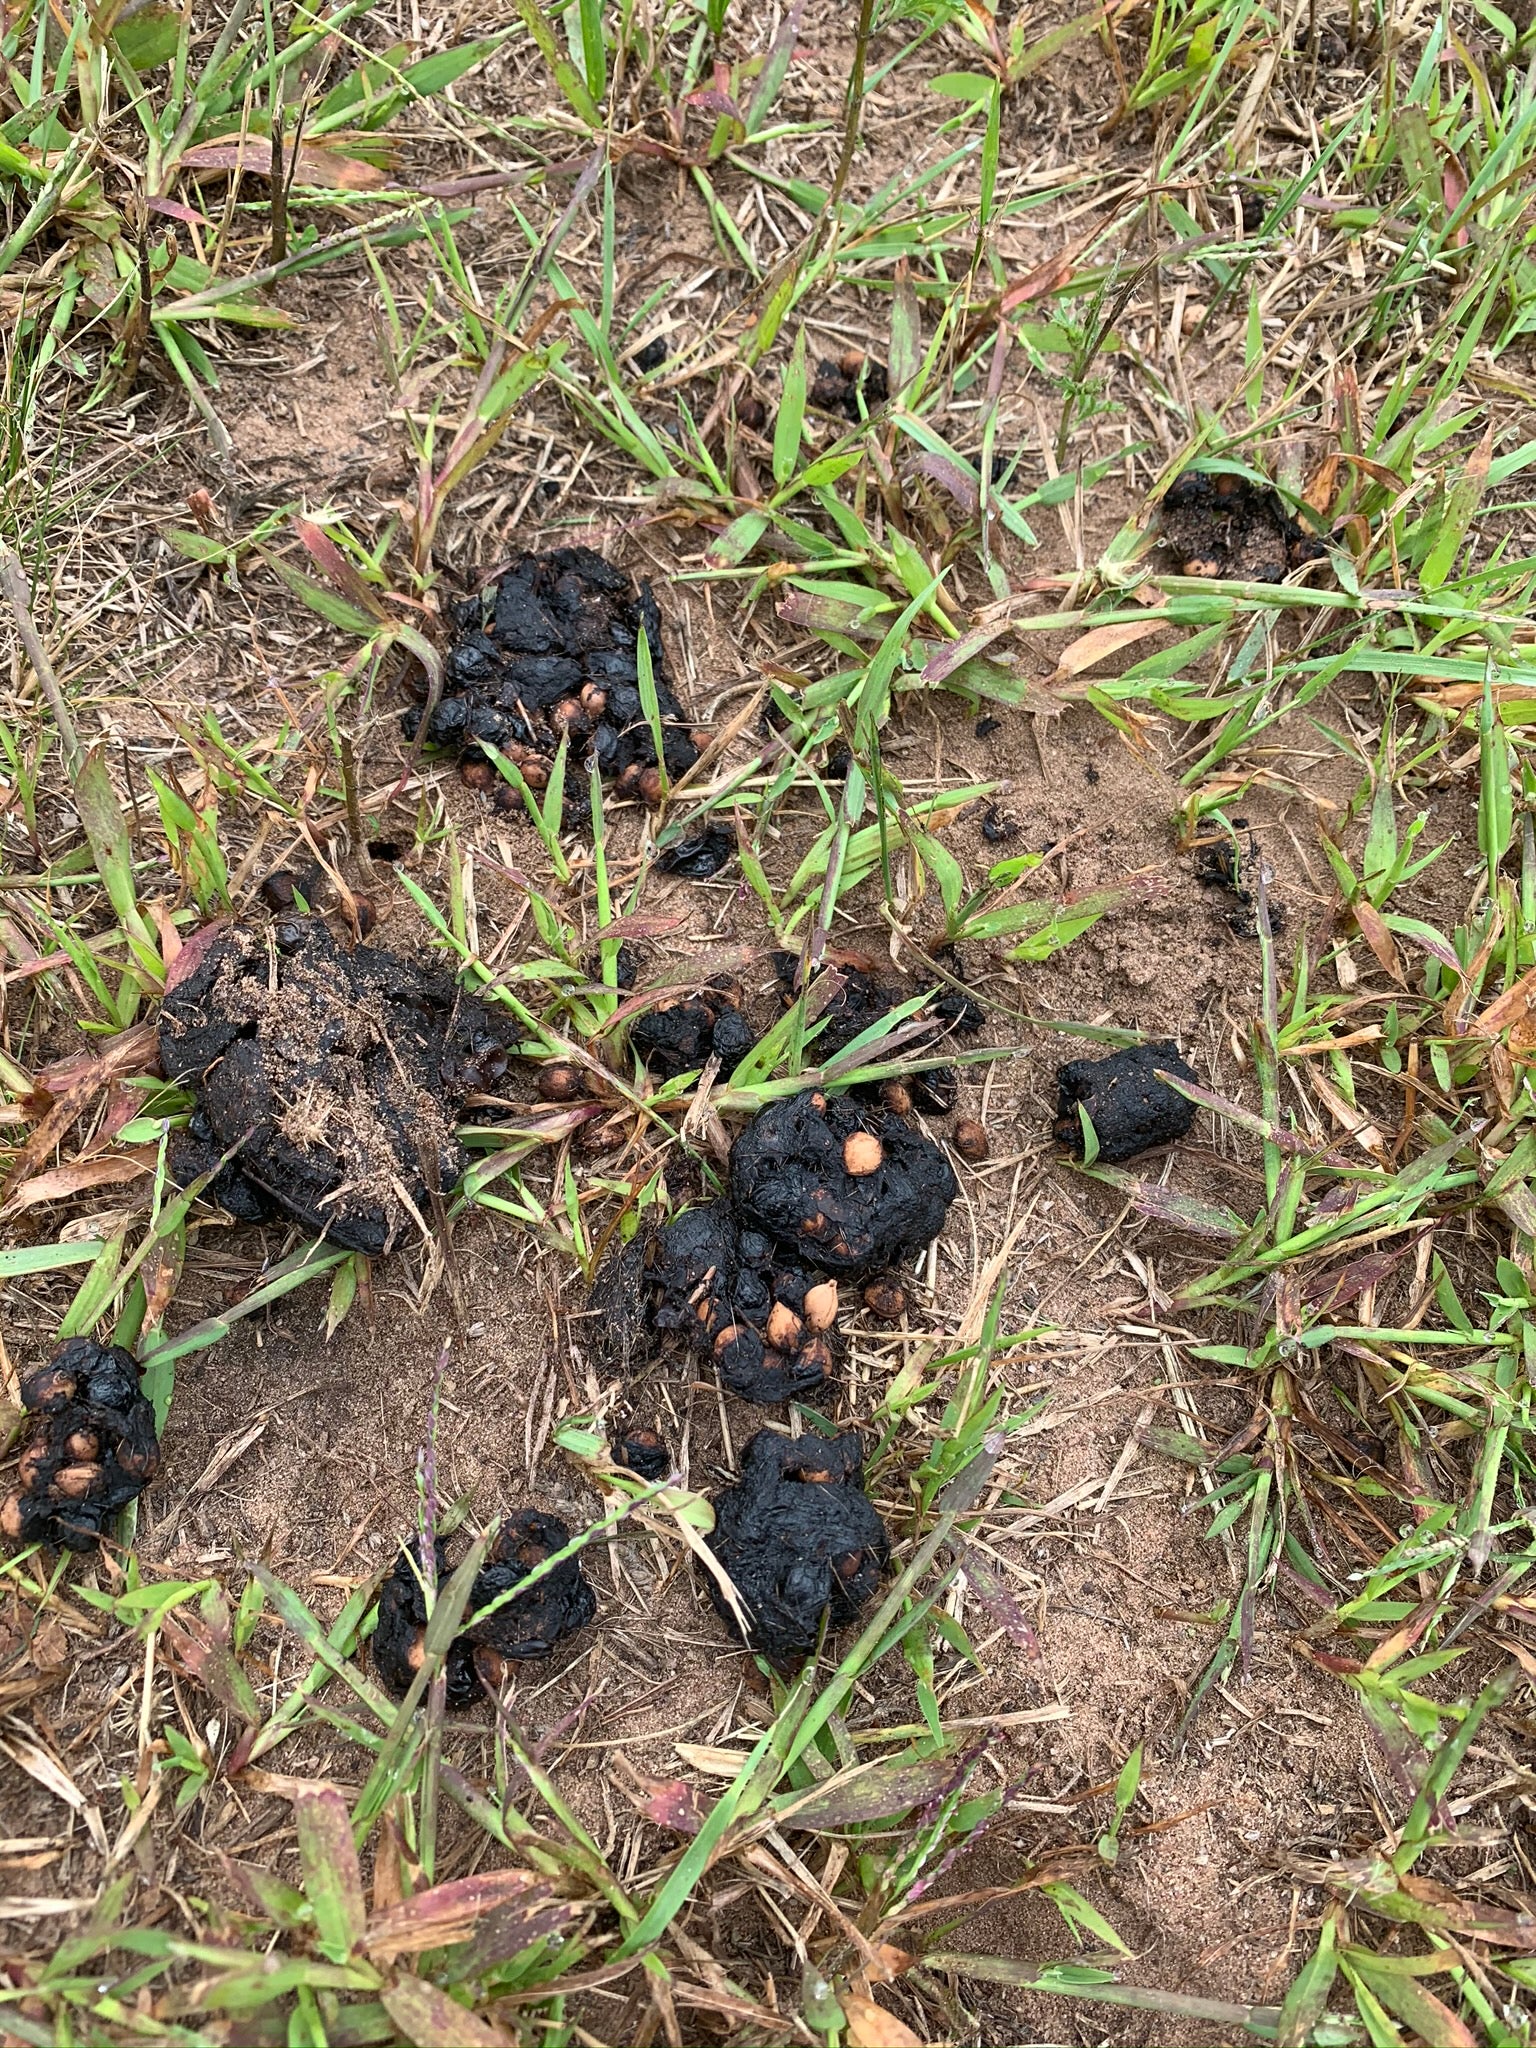 In case you’re wondering what bear poop looks like, here’s some. Lots of horse poop on the trails- don’t let it scare ya!